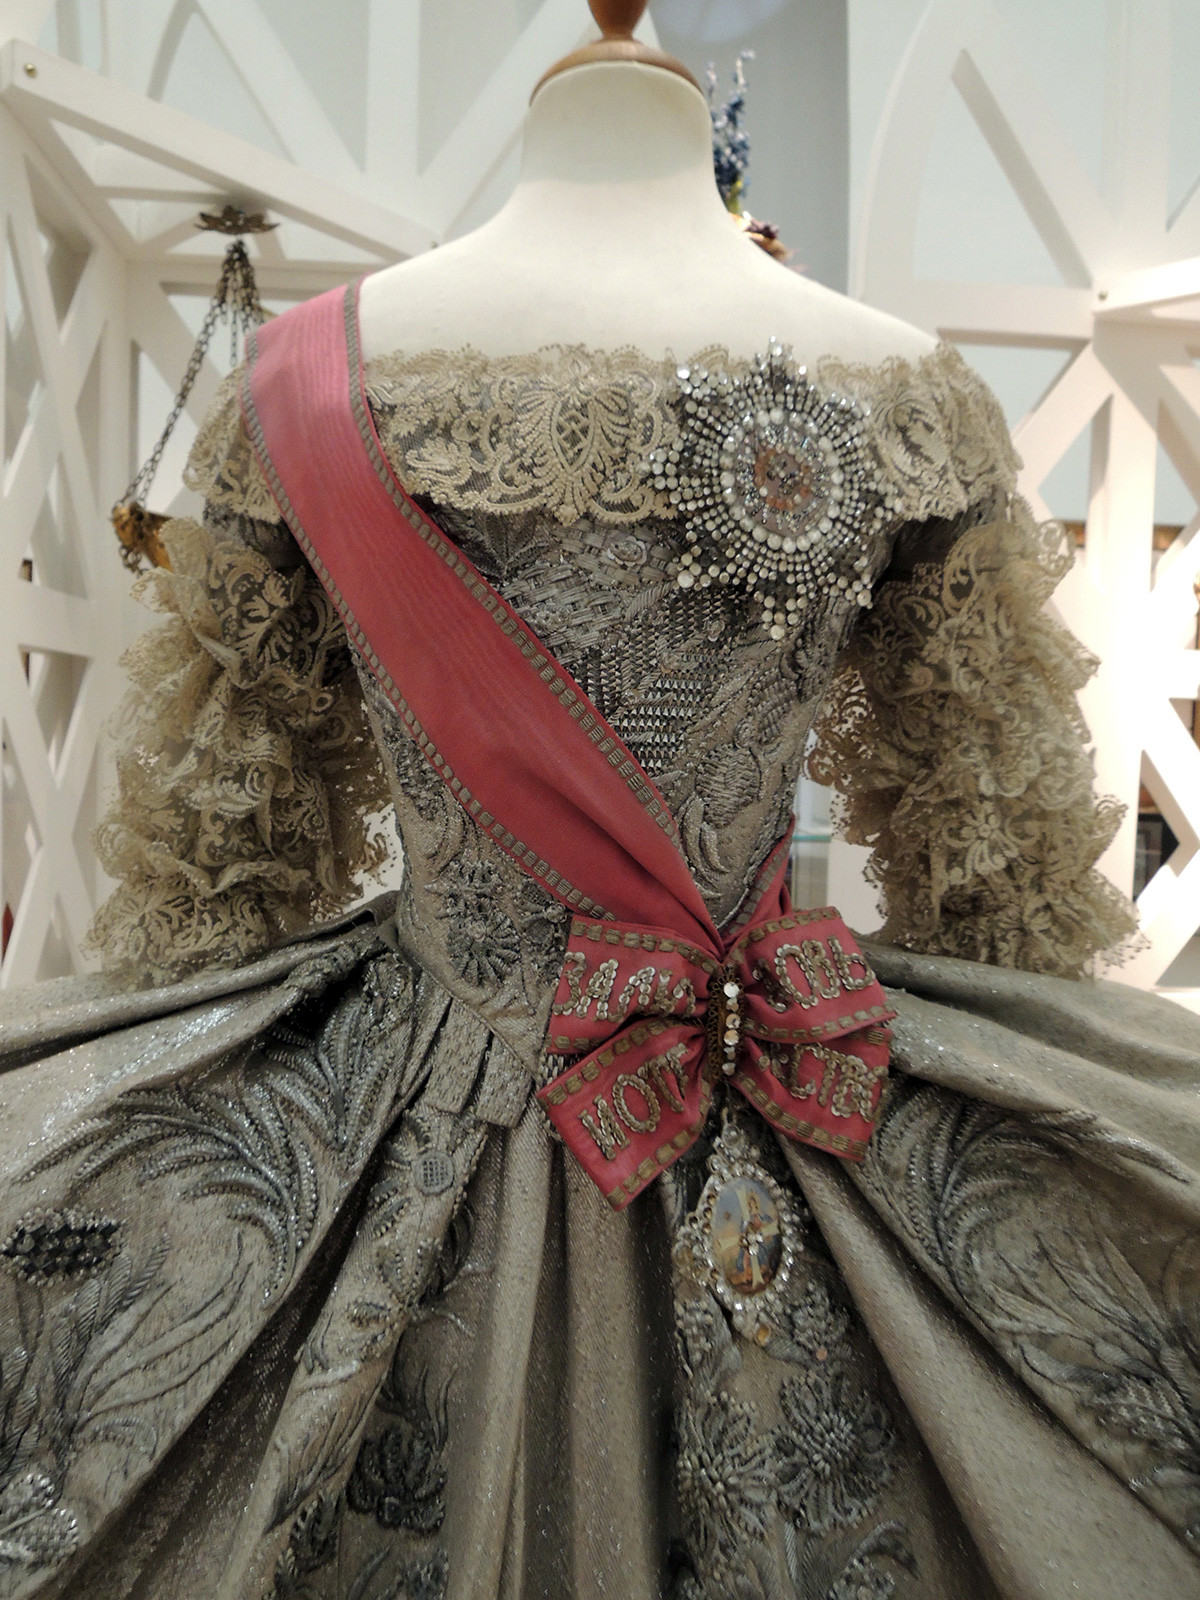 A replica of Catherine I's wedding dress, decorated with a Star and a Badge of the Order of St. Catherine.